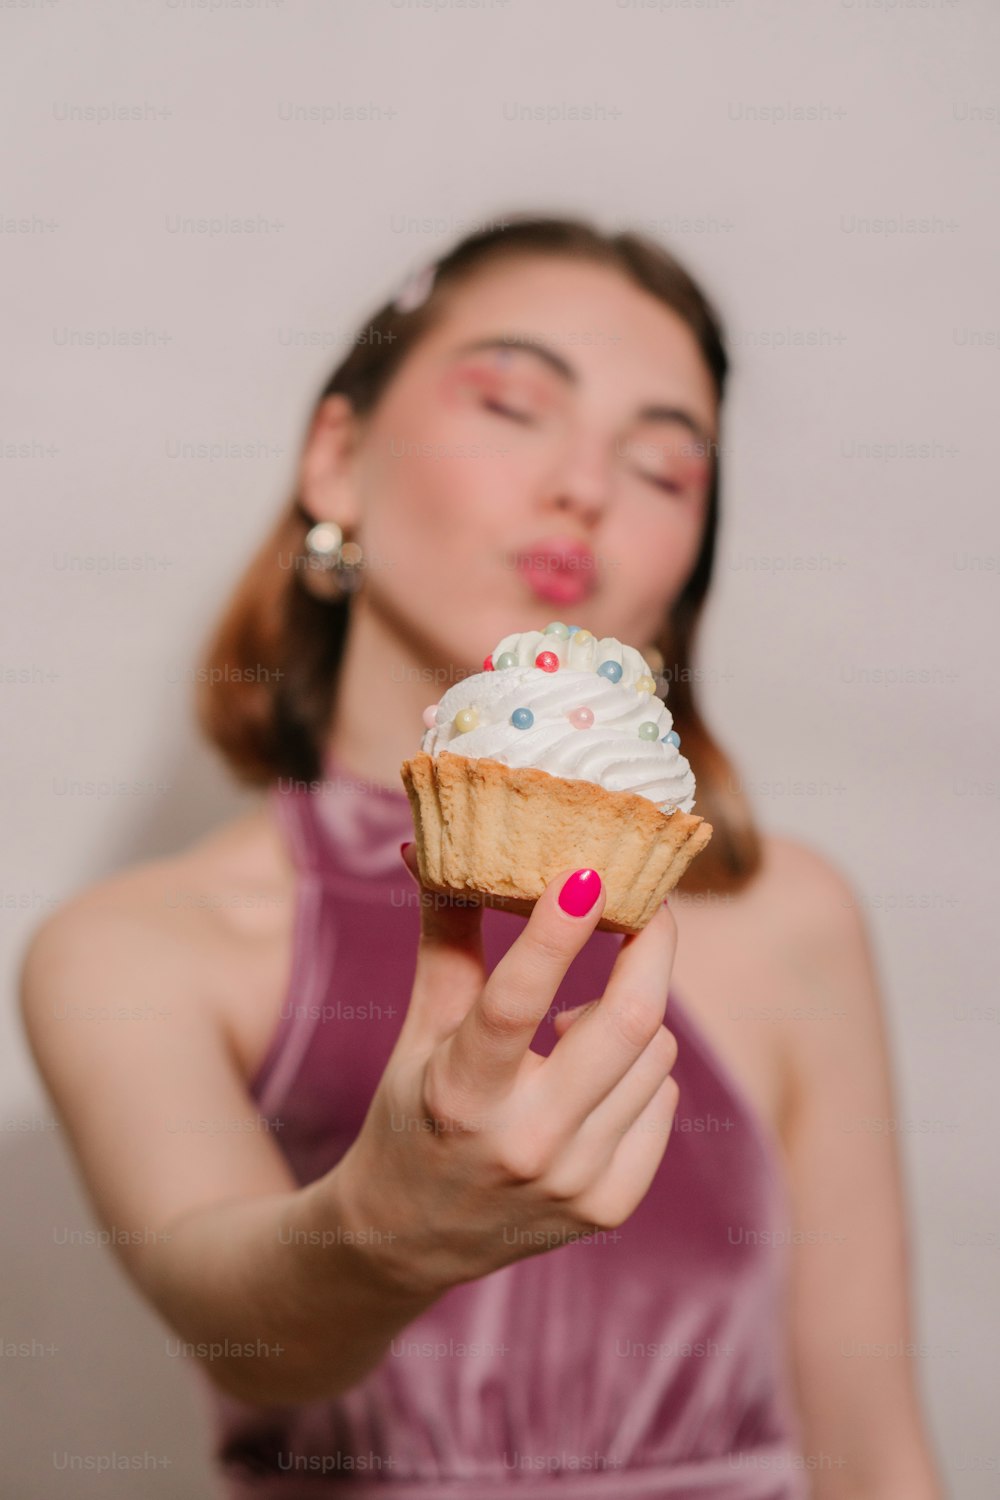 a woman in a purple dress holding an ice cream cone